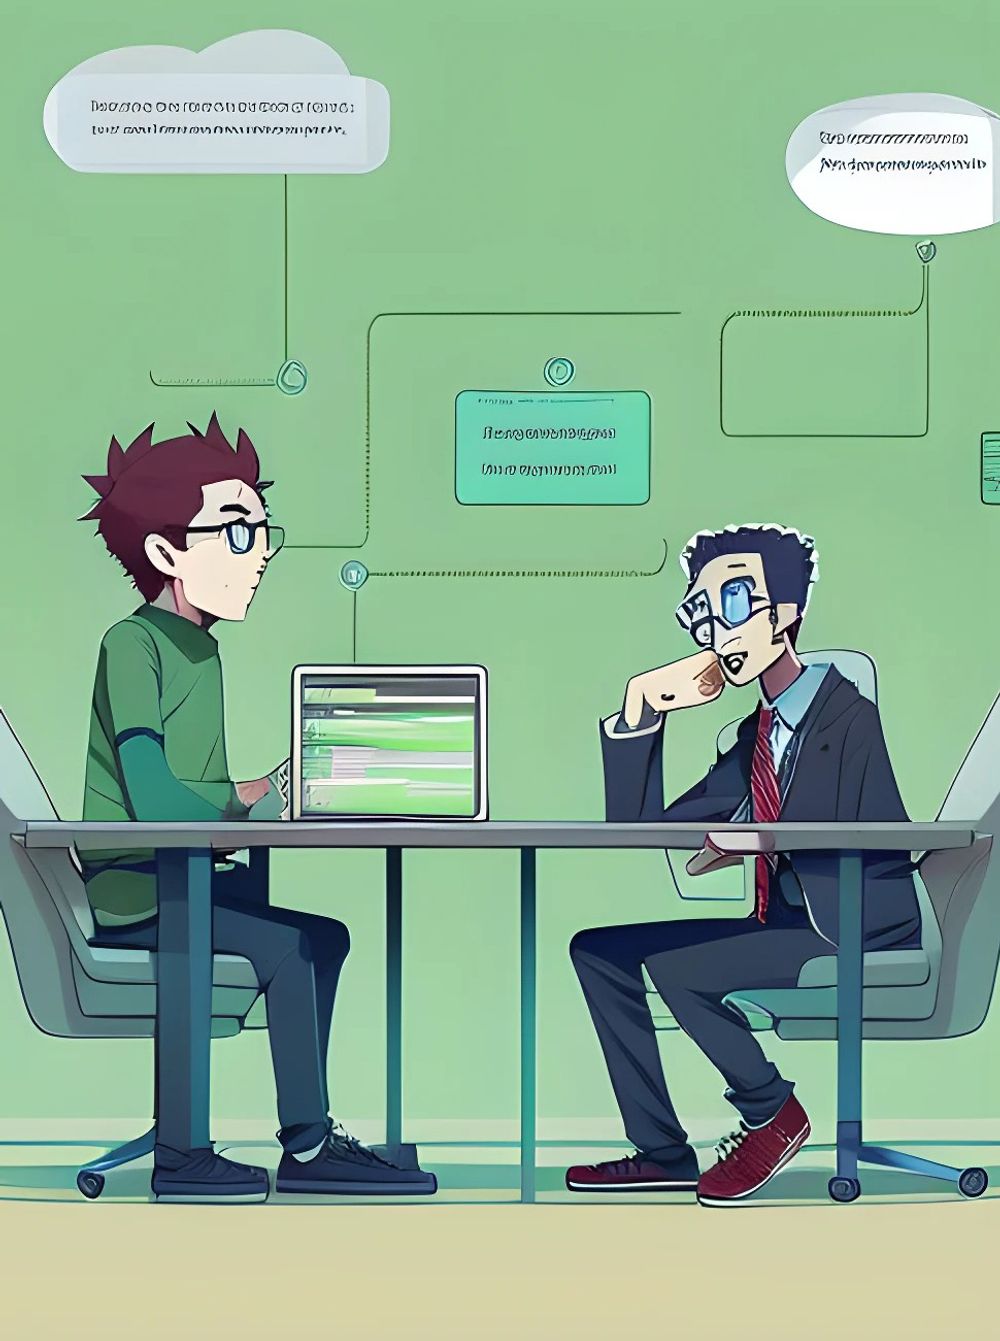 two developers anime style cartoon